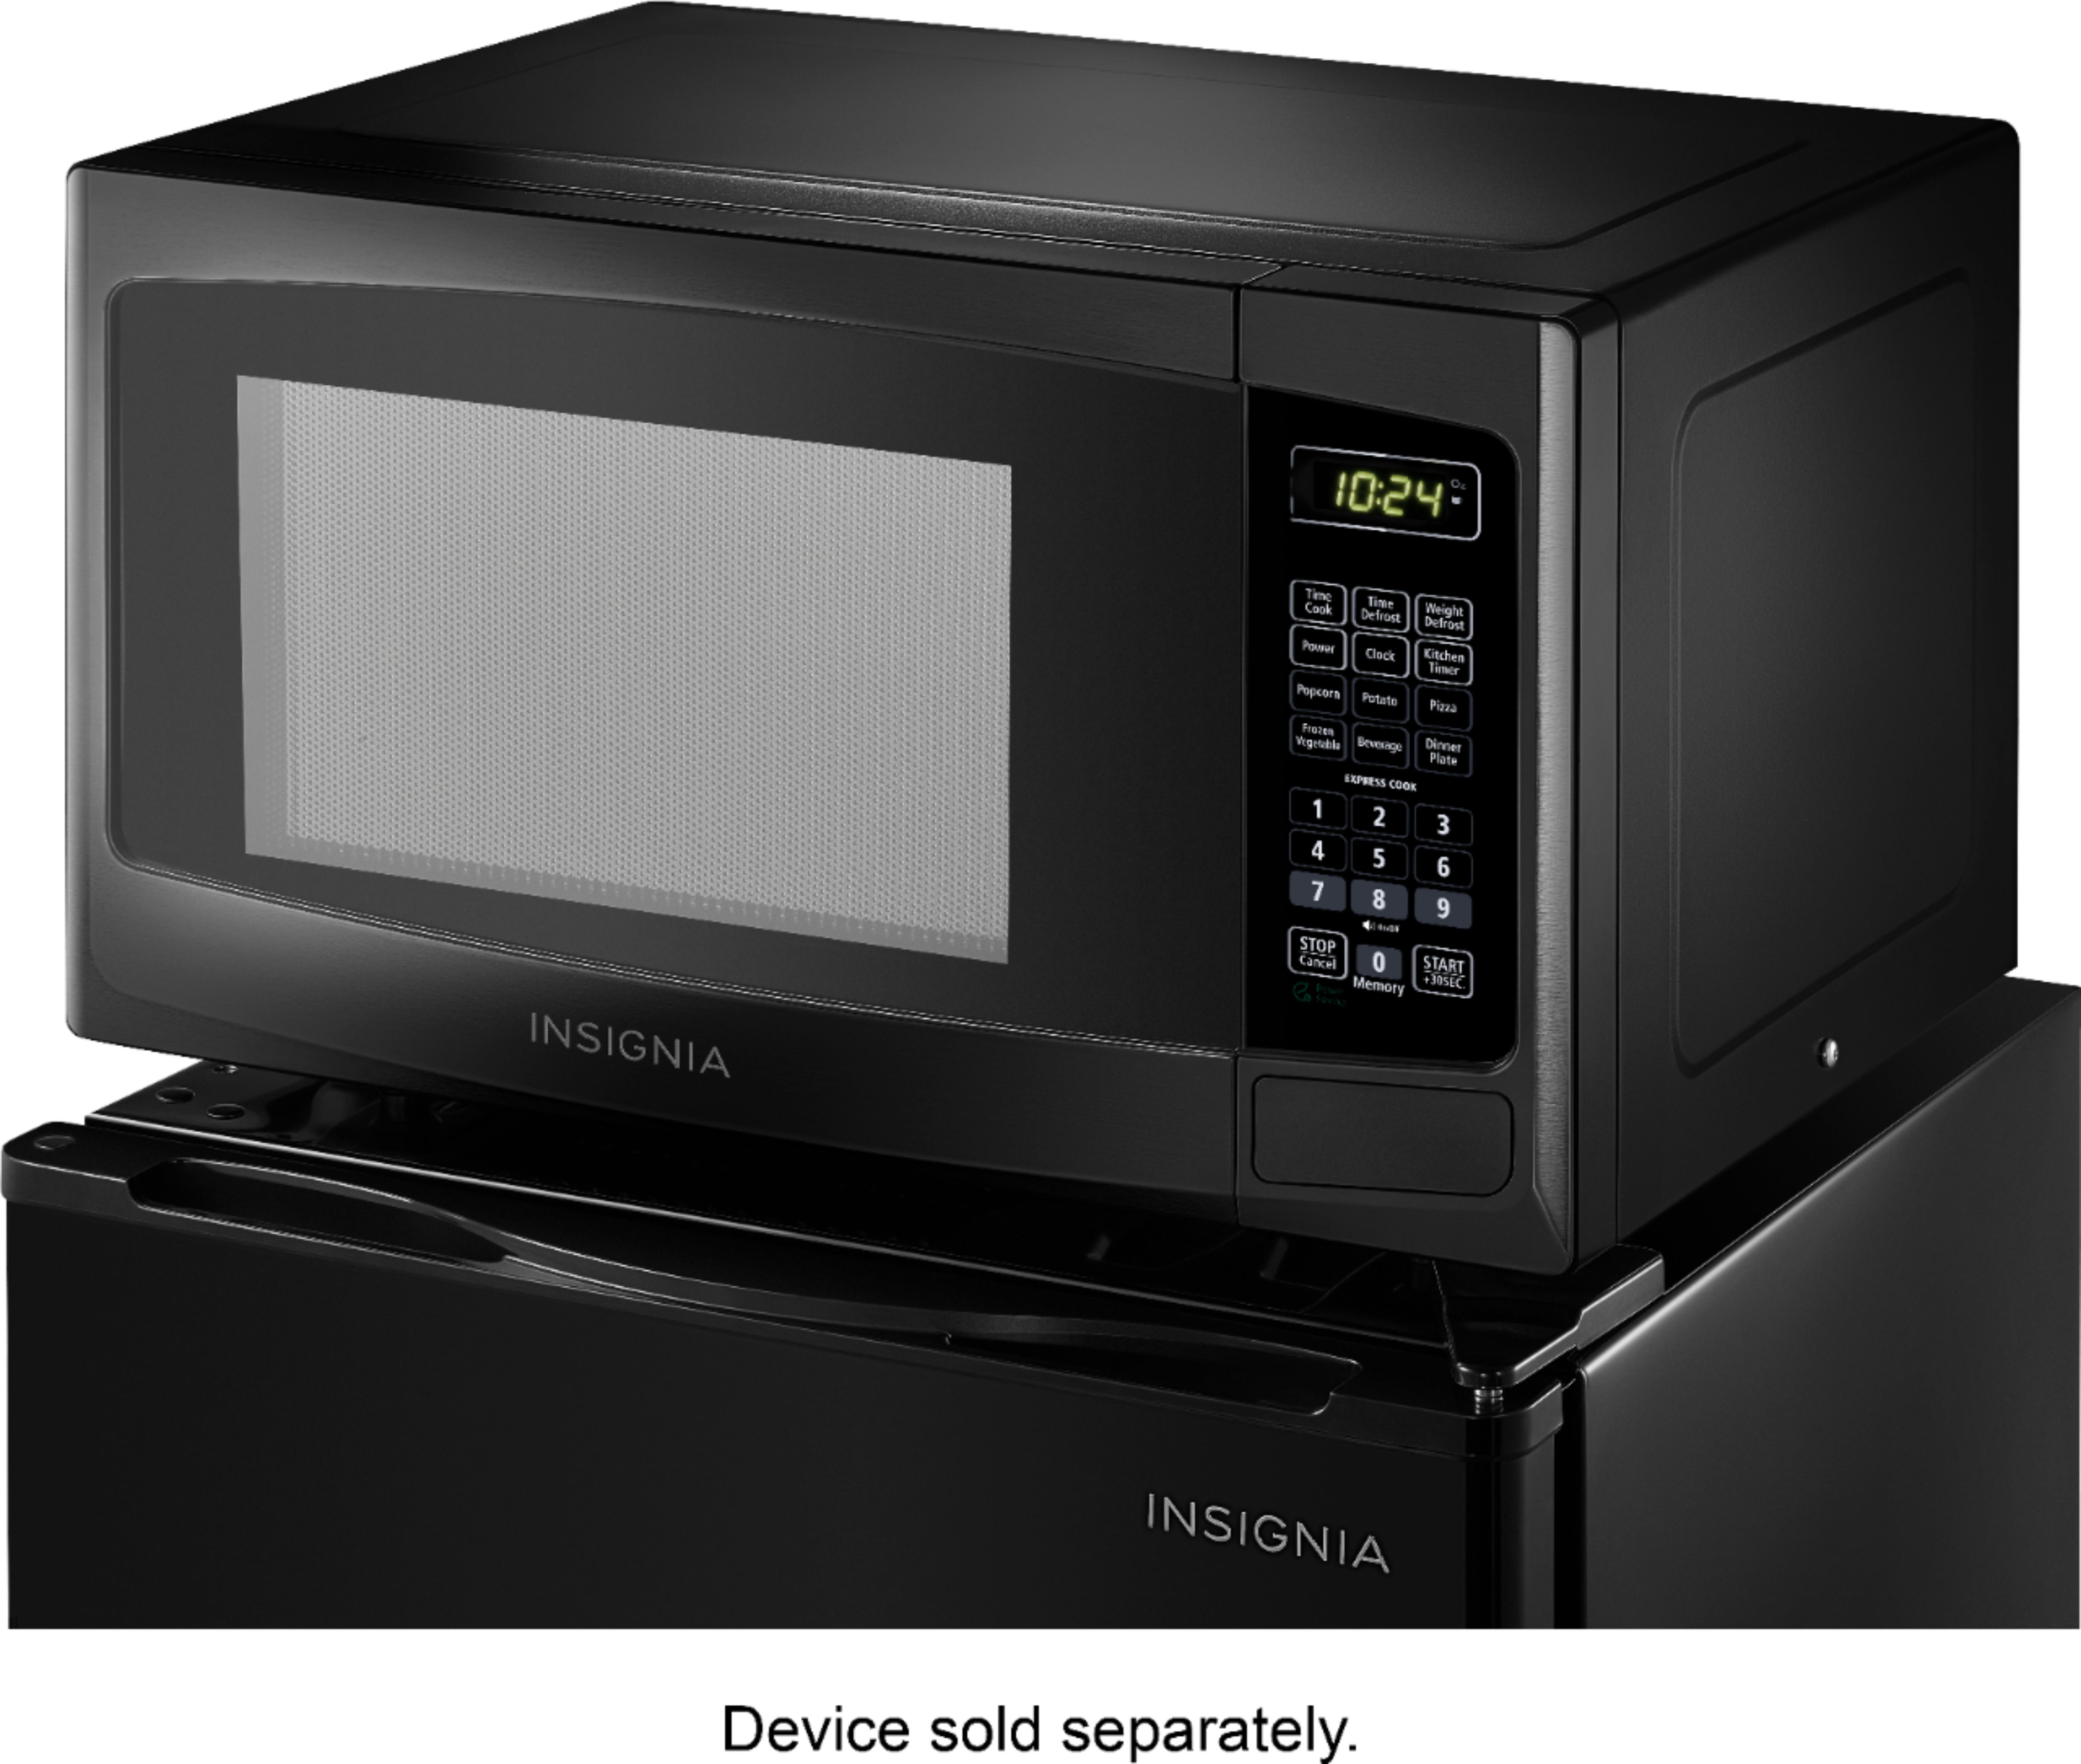 STAINLESS STEEL INSIGNIA MICROWAVE OVEN NS-MW09SS8 0.9 CU FT COMPACT  COUNTERTOP 600603217258